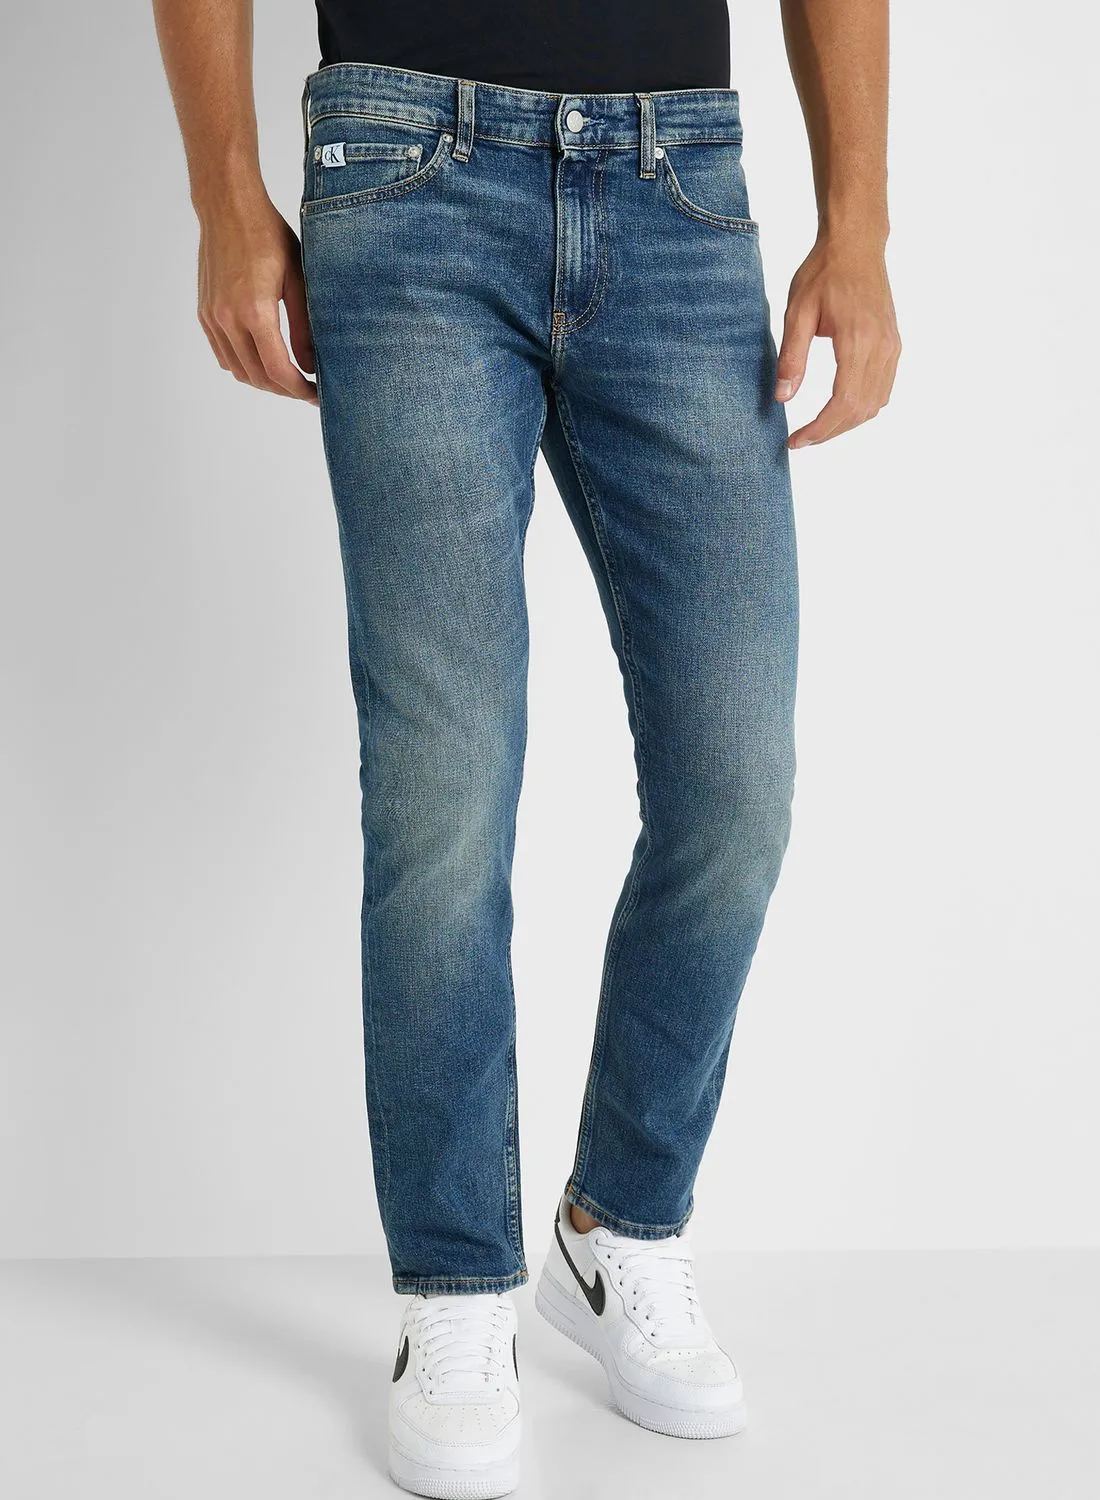 Calvin Klein Jeans Casual Slim Fit Jeans